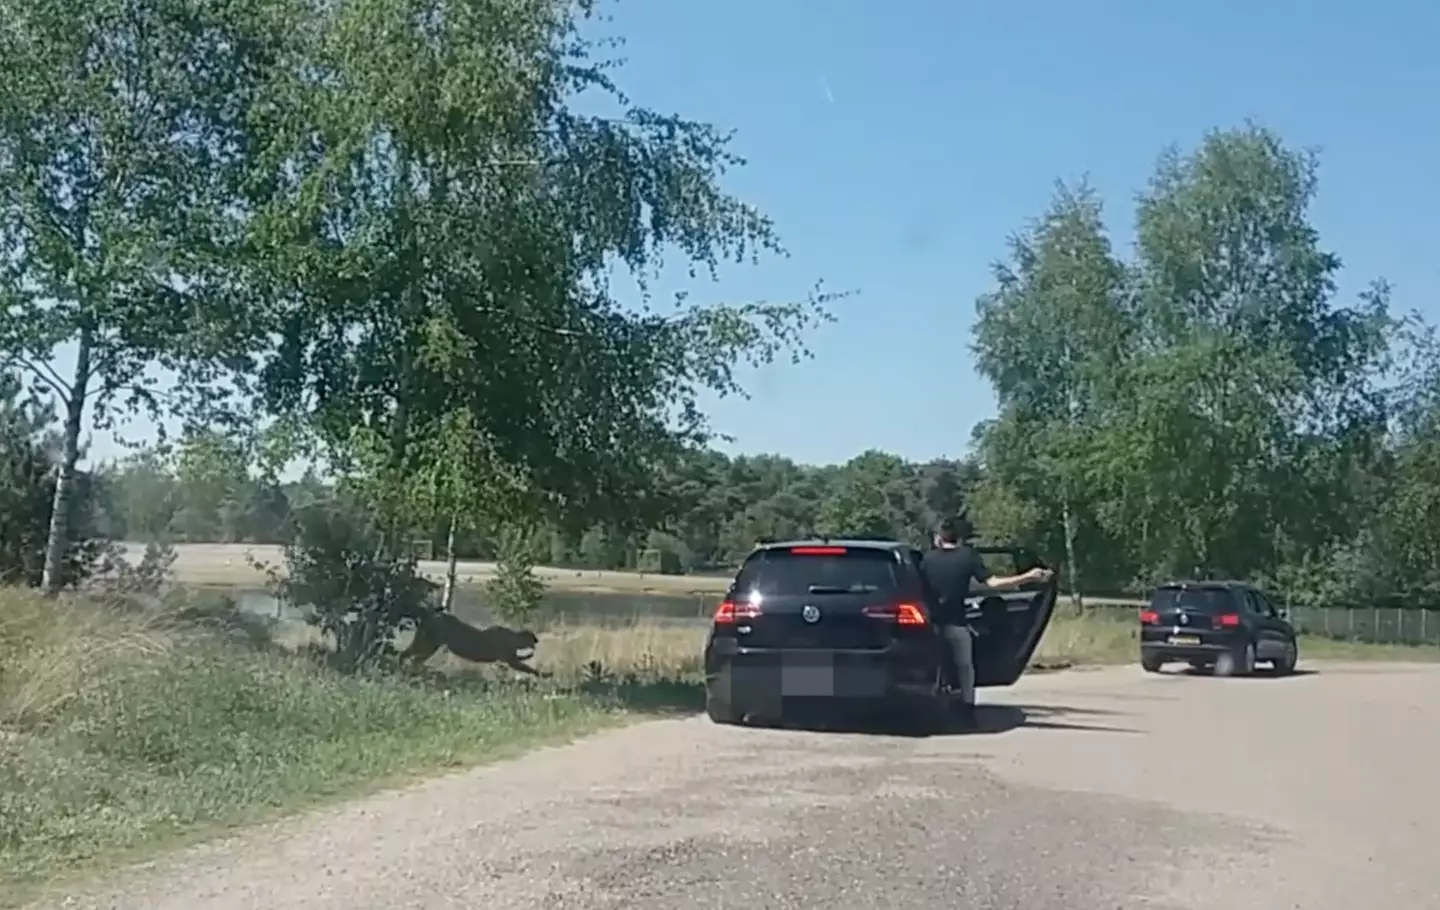 A pack of cheetahs were seen chasing the family as they scrambled to get back into their car. (ViralHog)